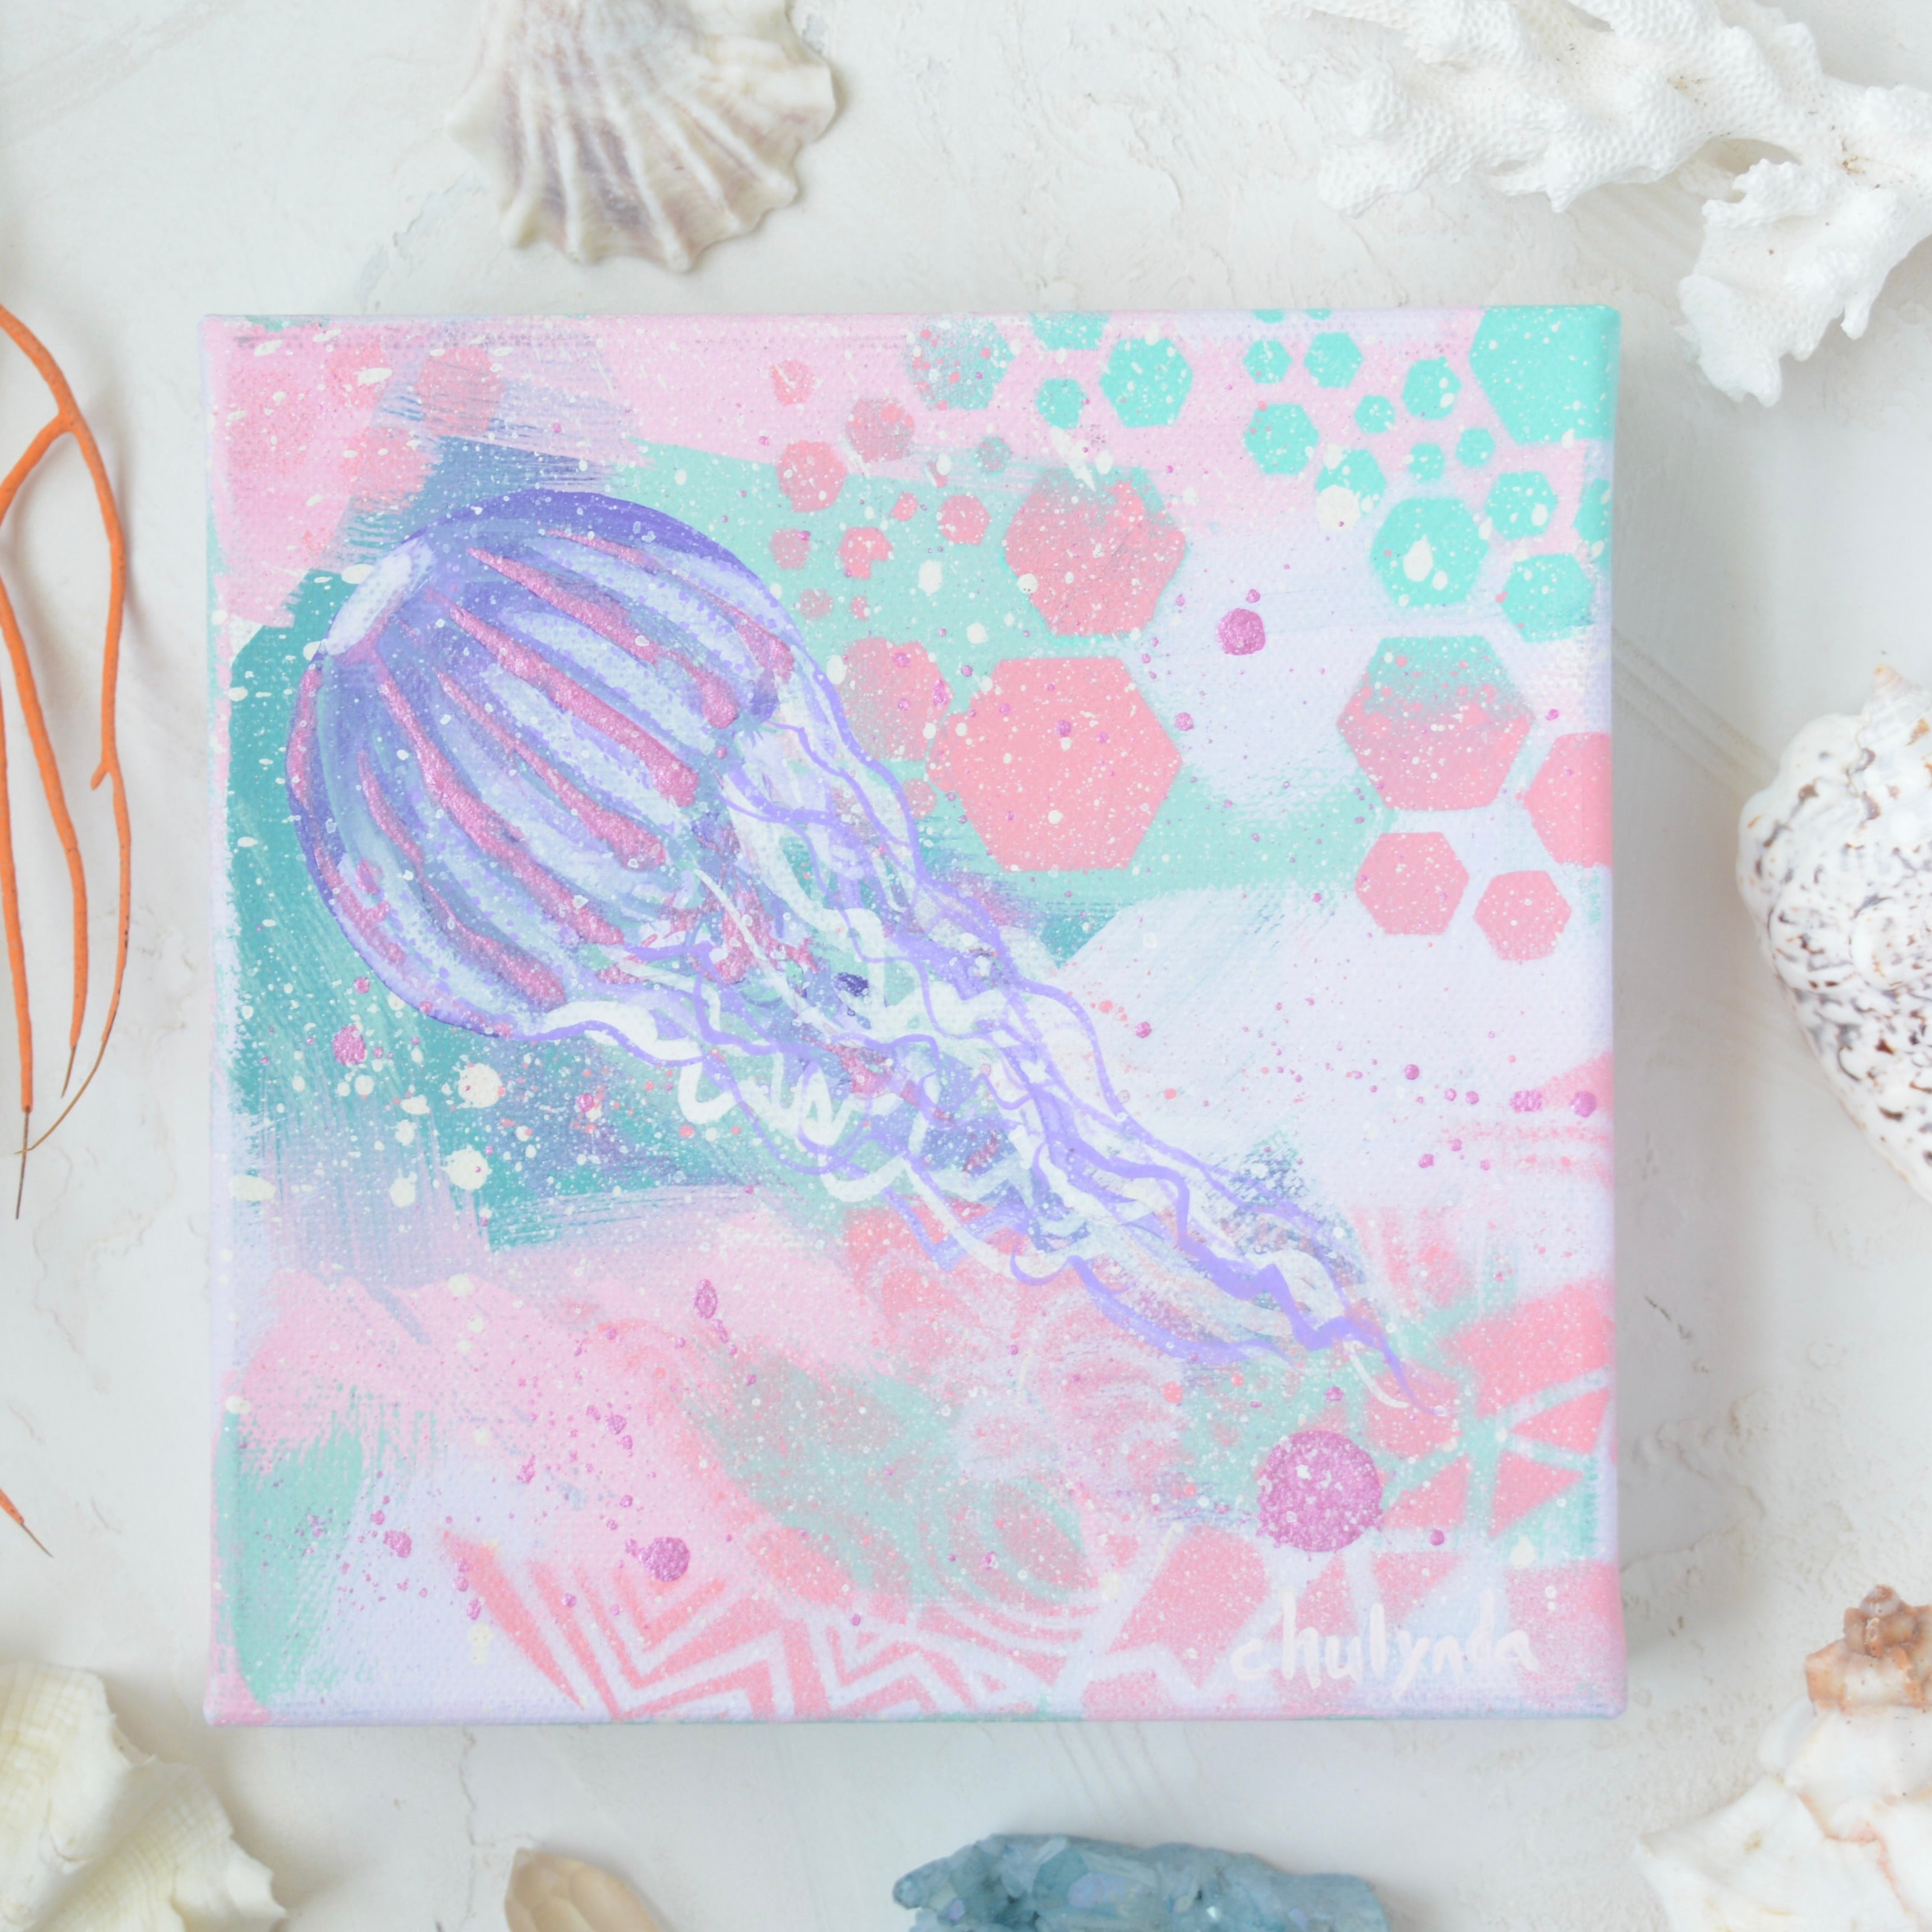 Flow Drawing for Kids: How to Draw a Jellyfish - Arty Crafty Kids